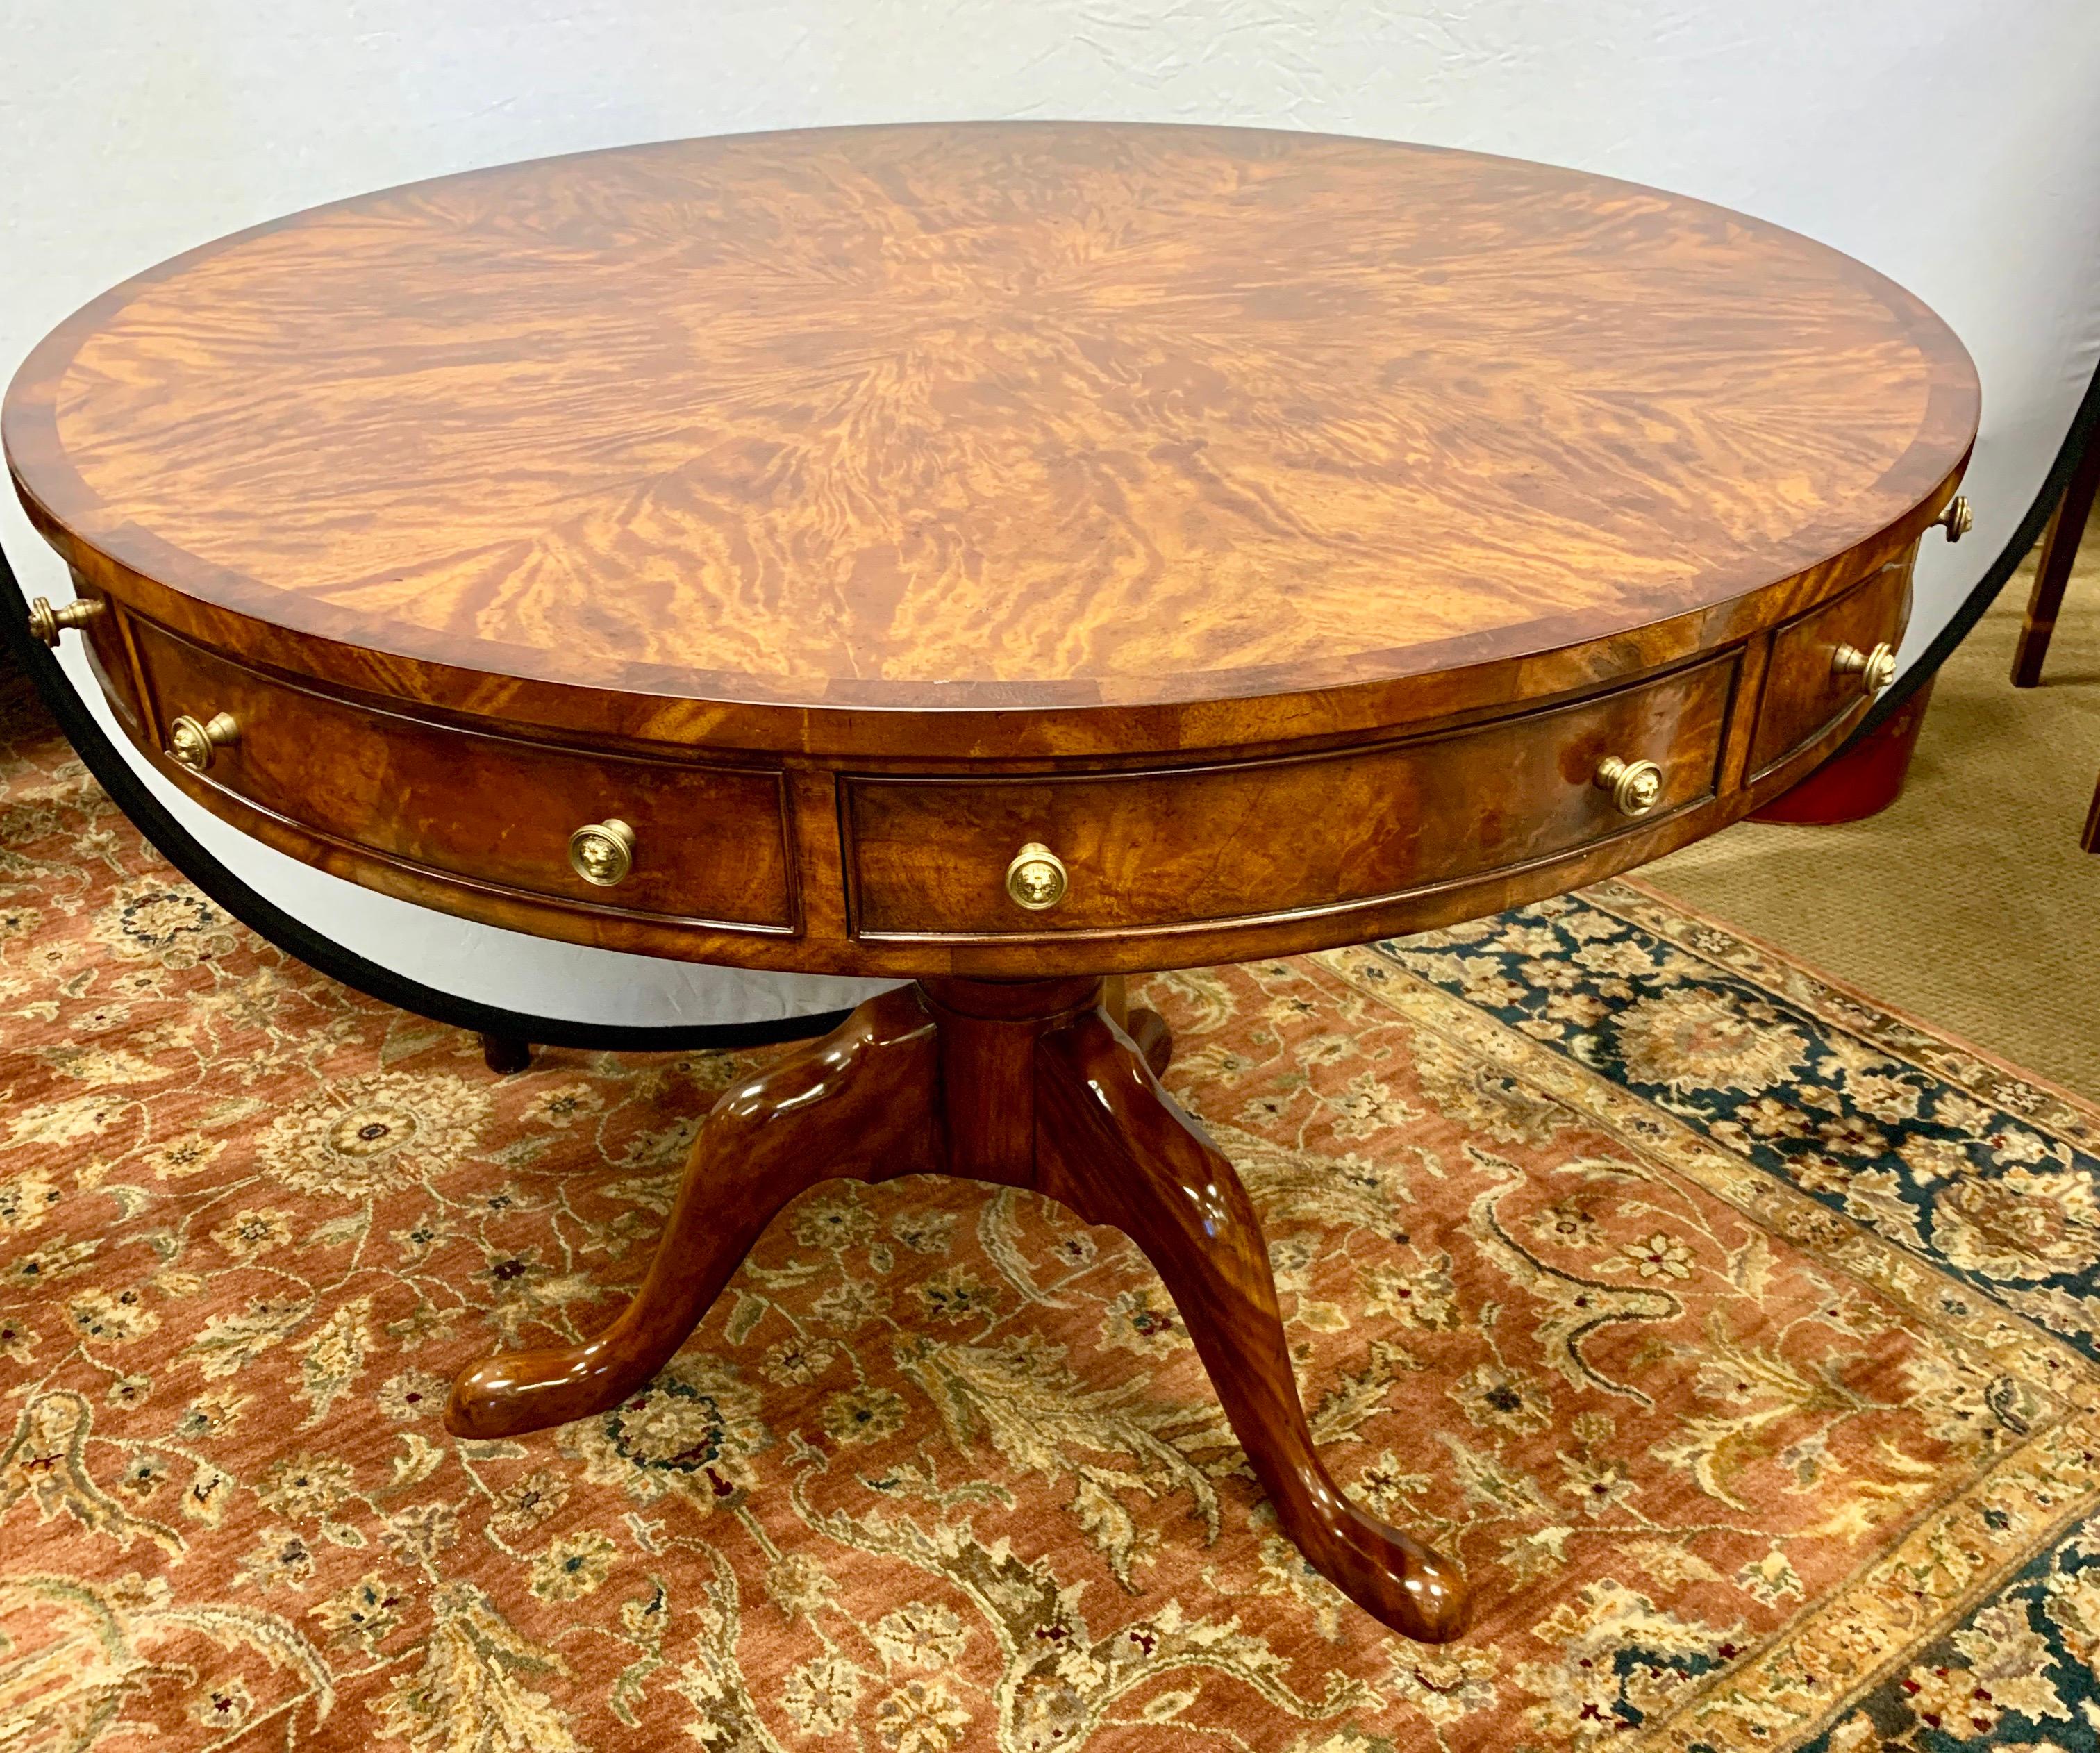 Stunning Theodore Alexander Althorp flame mahogany round center table with four working drawers and four faux drawers with round brass lion pulls. It sits on a tripod pedestal base. Perfect as a center table but can also be used as a game or